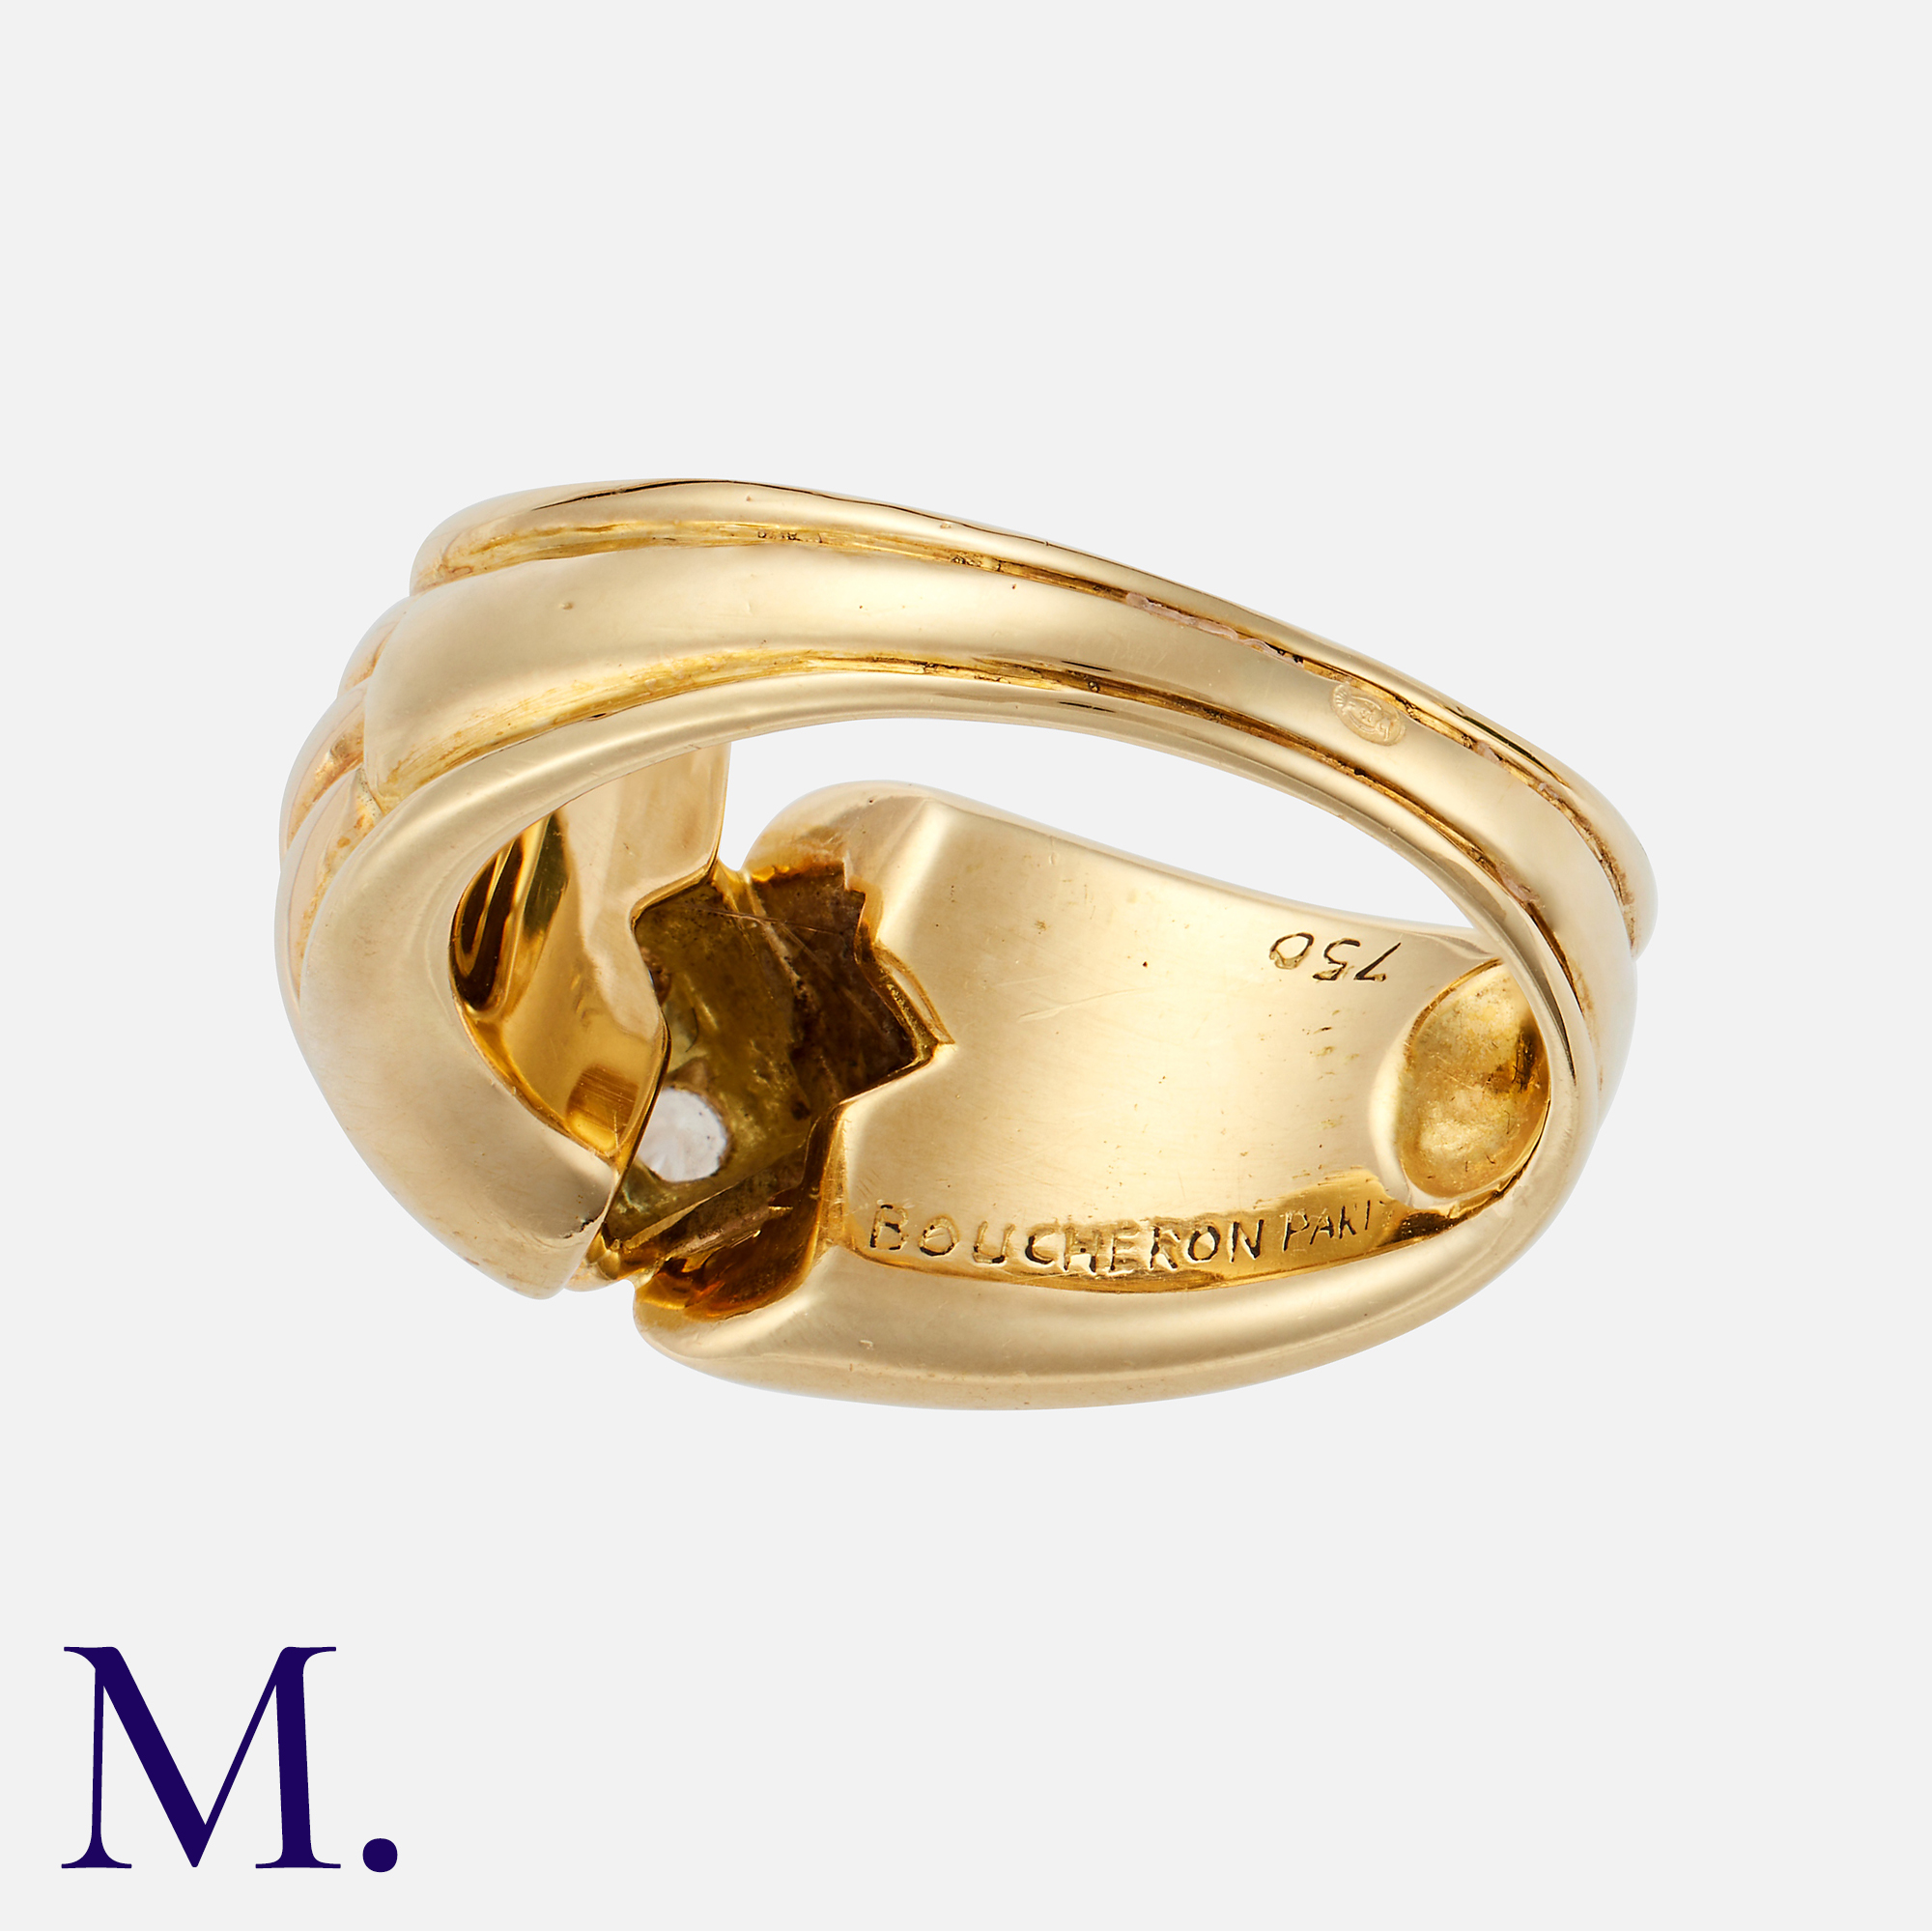 BOUCHERON. A Diamond Ring in 18K yellow gold, set with five round cut diamonds weighing - Image 2 of 2